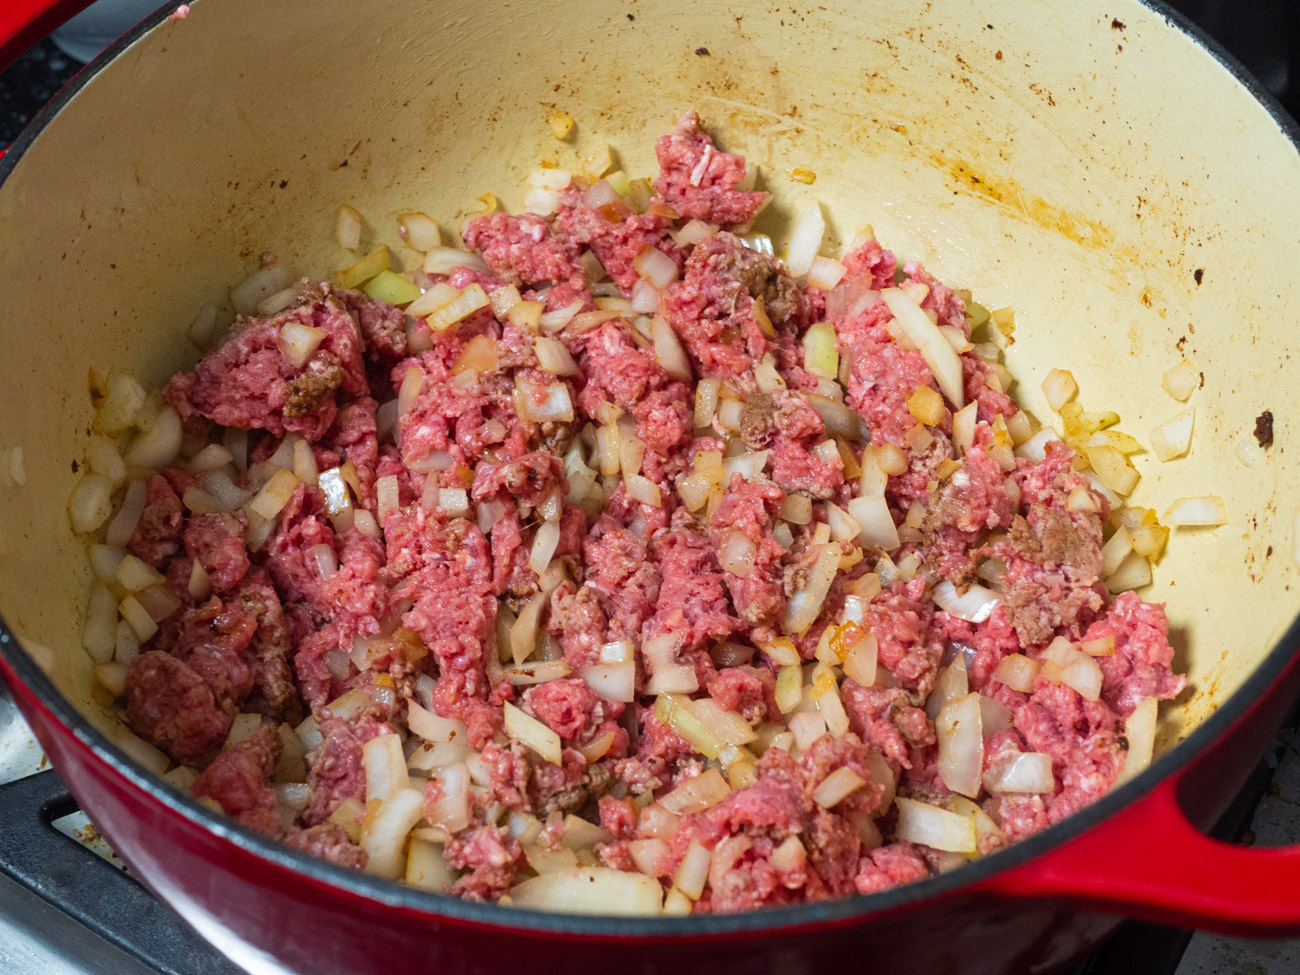 Add beef and onion to pot and cook until beef is no longer pink. Add garlic and cook 1 minute more.